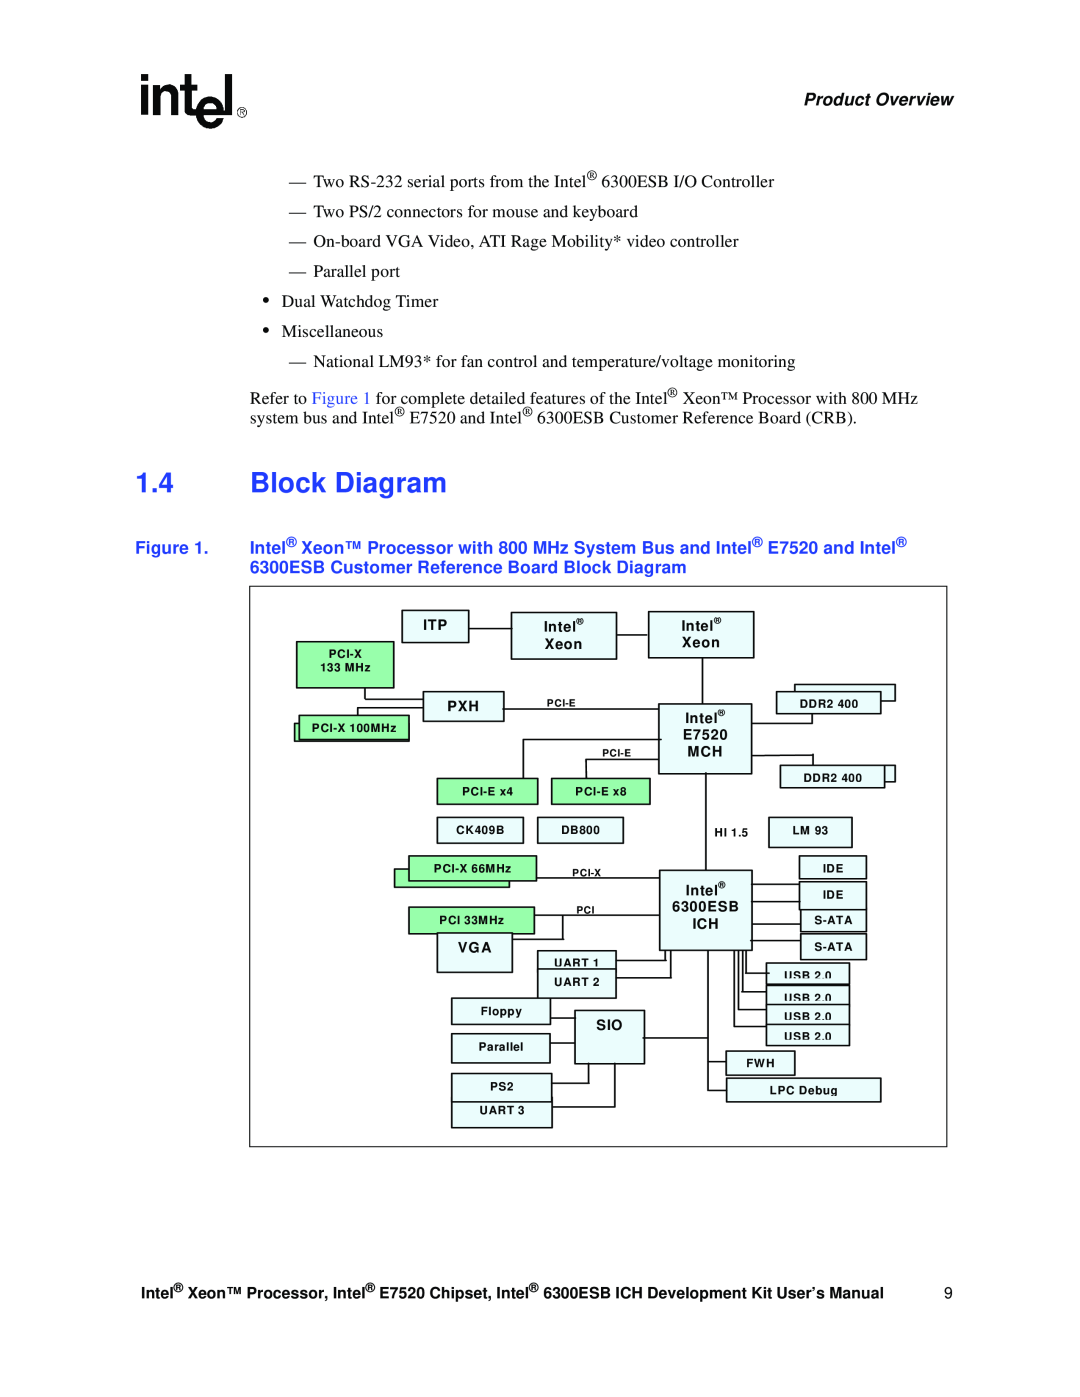 Intel 6300ESB ICH, Xeon user manual Block Diagram, Product Overview 